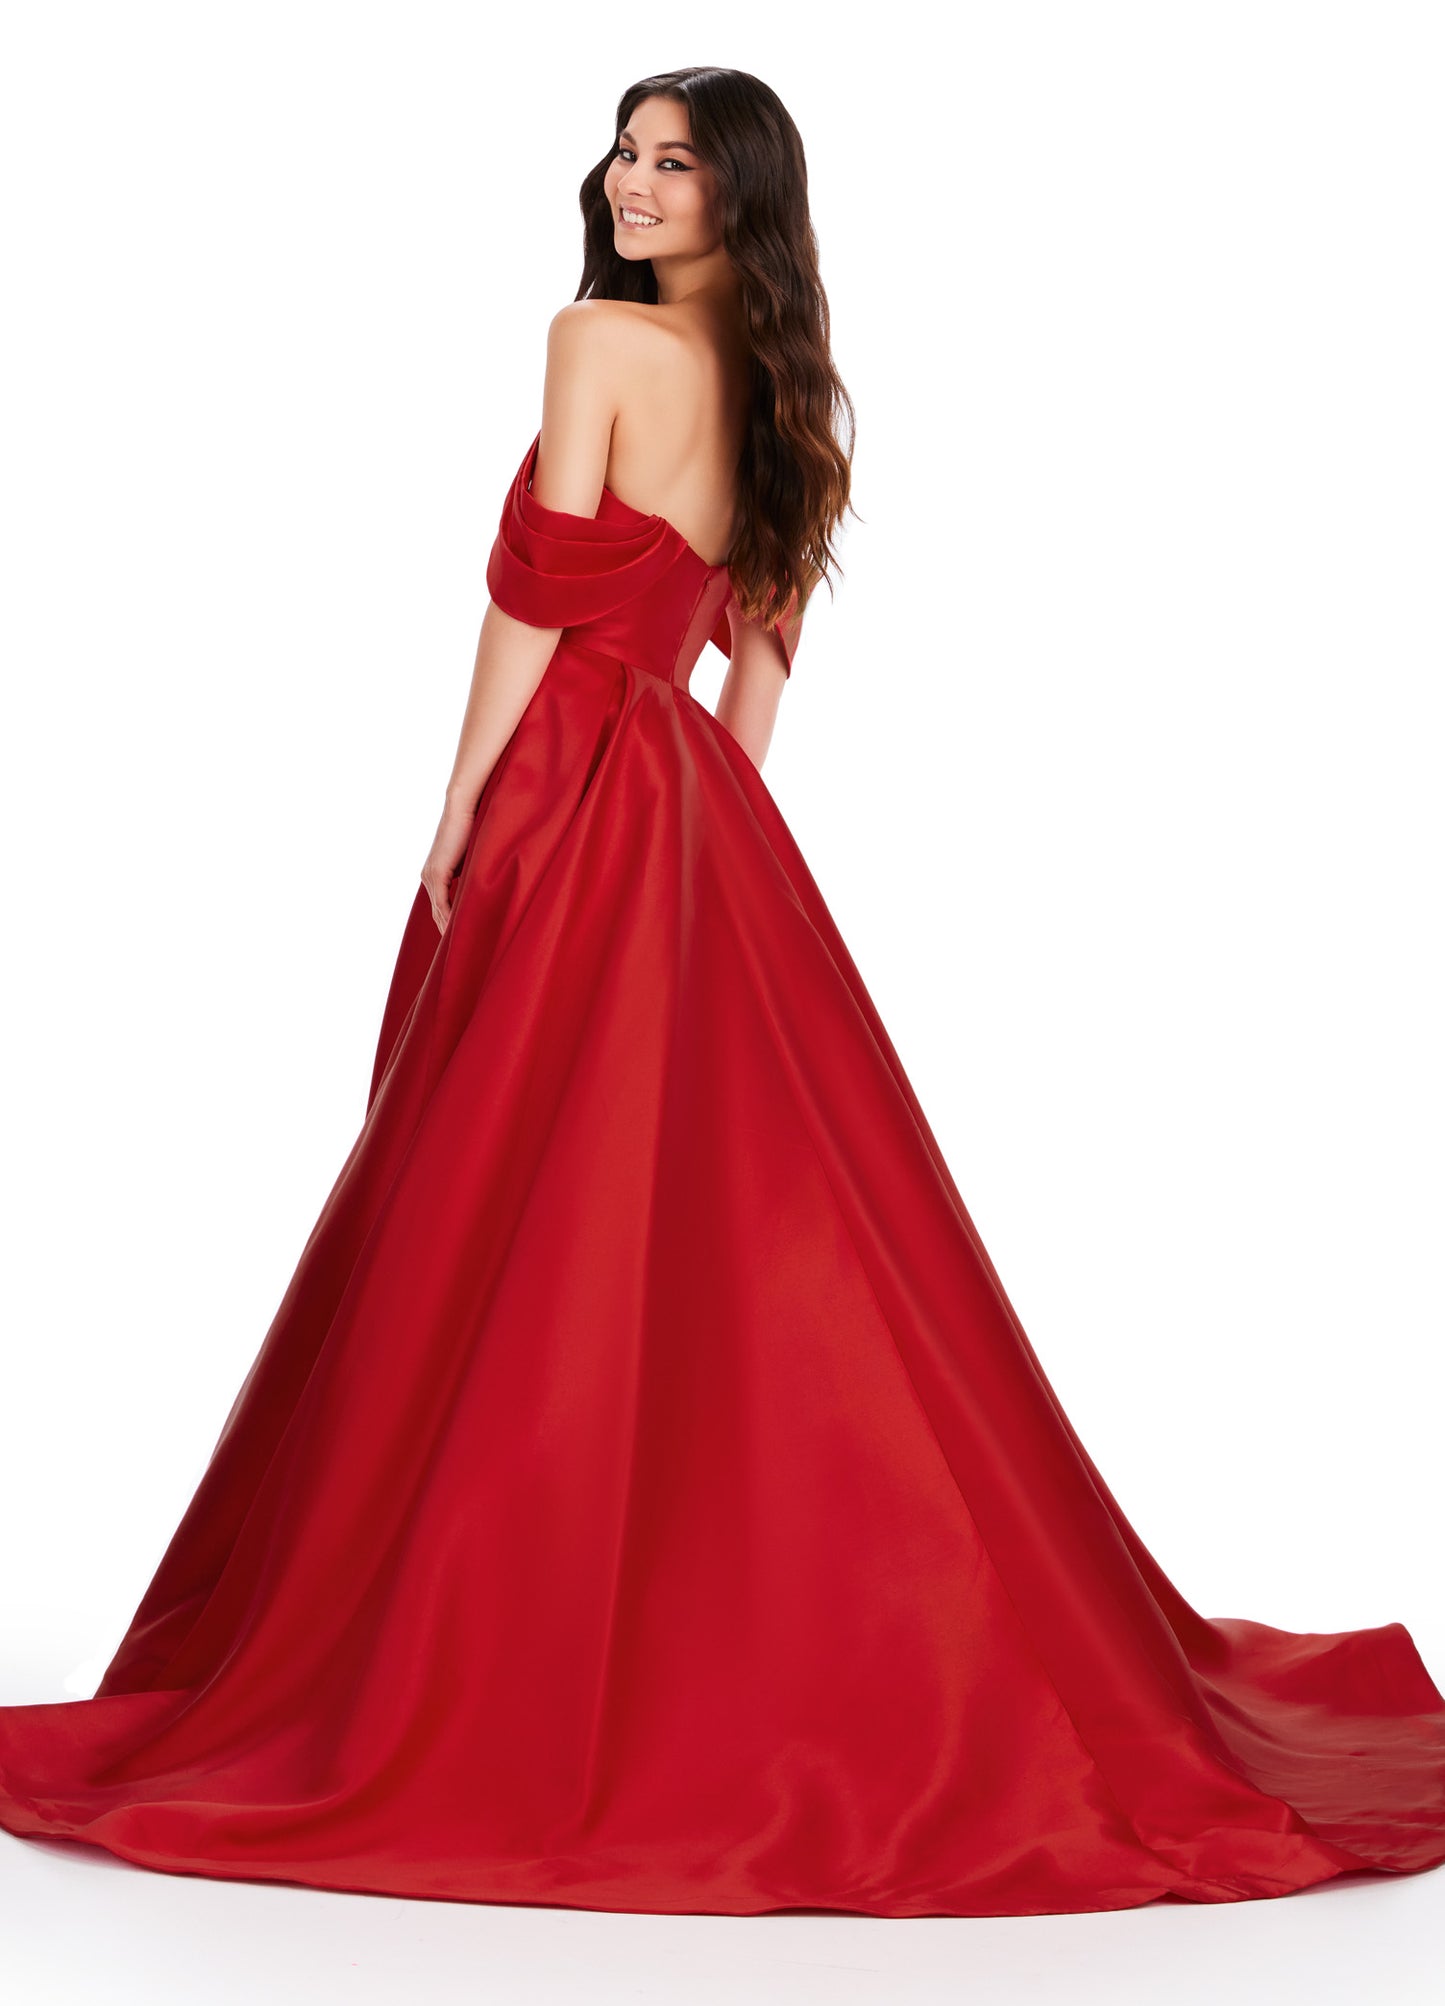 Expertly designed by Ashley Lauren, this stunning Prom Dress features an elegant off the shoulder neckline and a full ballgown skirt. Crafted with Mikado fabric, this formal evening gown exudes sophistication and style. Perfect for any special occasion, this dress is sure to make you stand out with its timeless design and impeccable fit. An off shoulder gown perfect for any event. This Mikado ball gown features a pleated off shoulder detail.